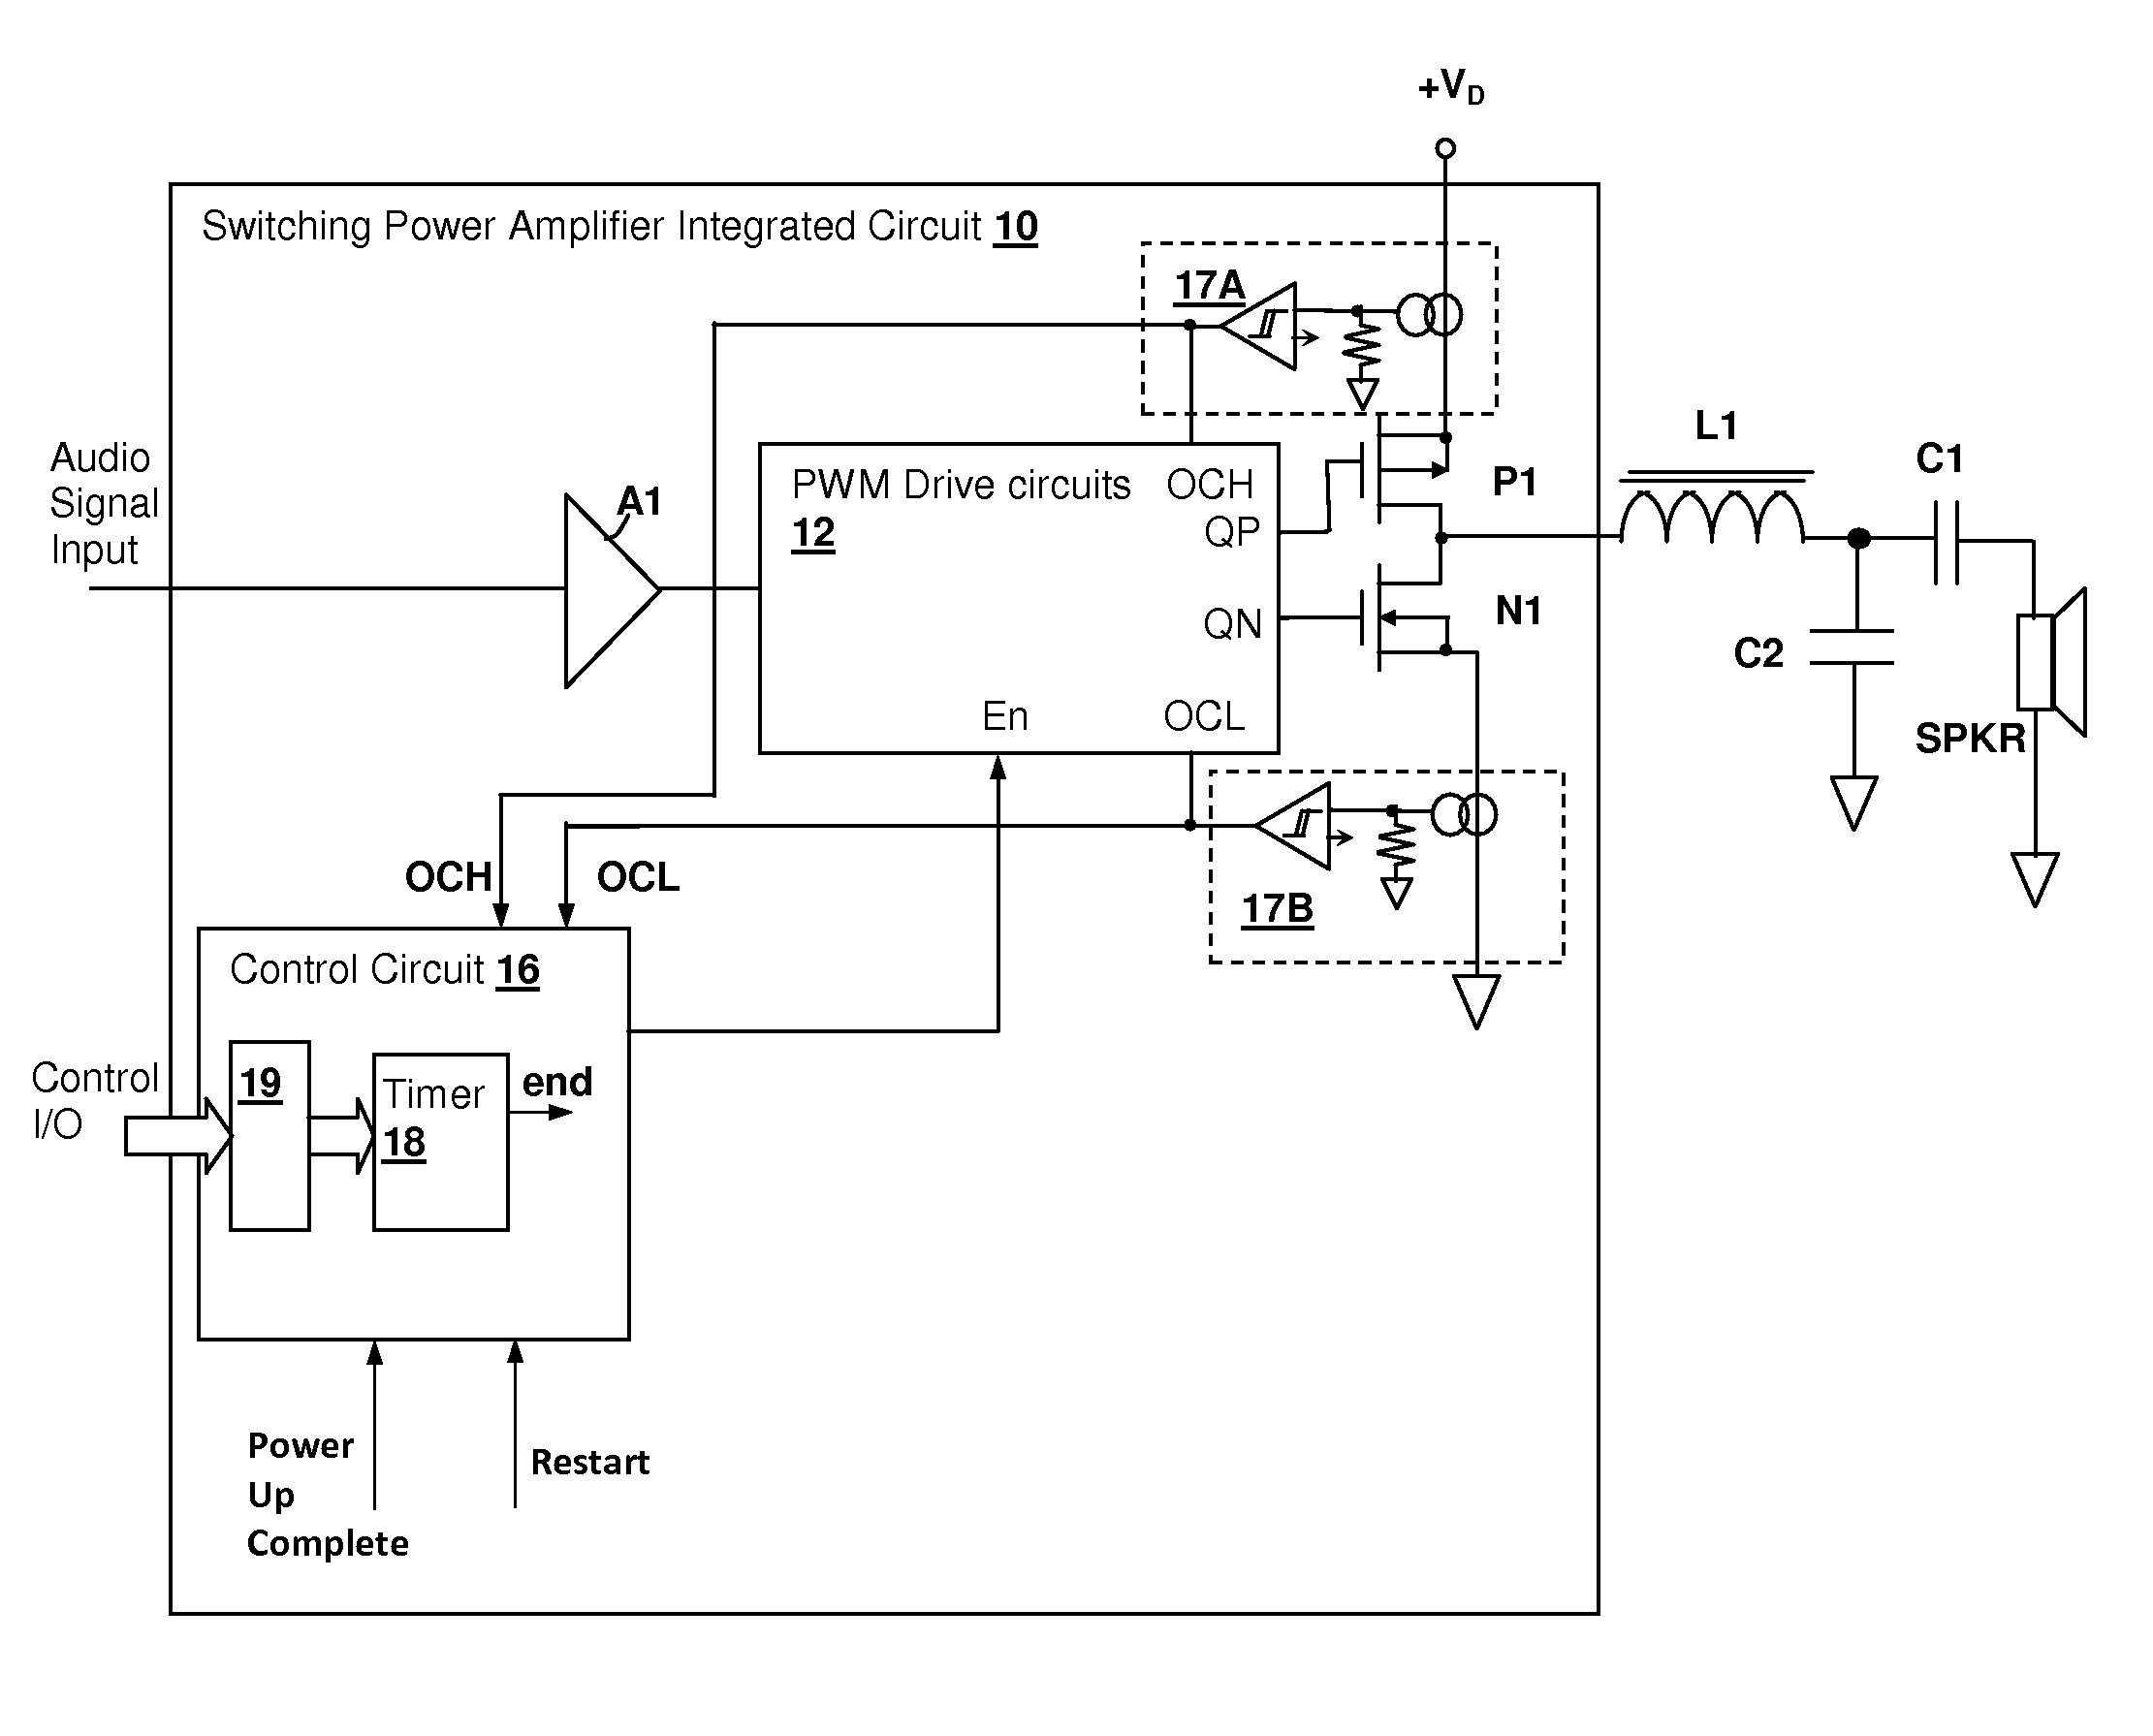 Over-current protection circuit and method for protecting switching power amplifier circuits